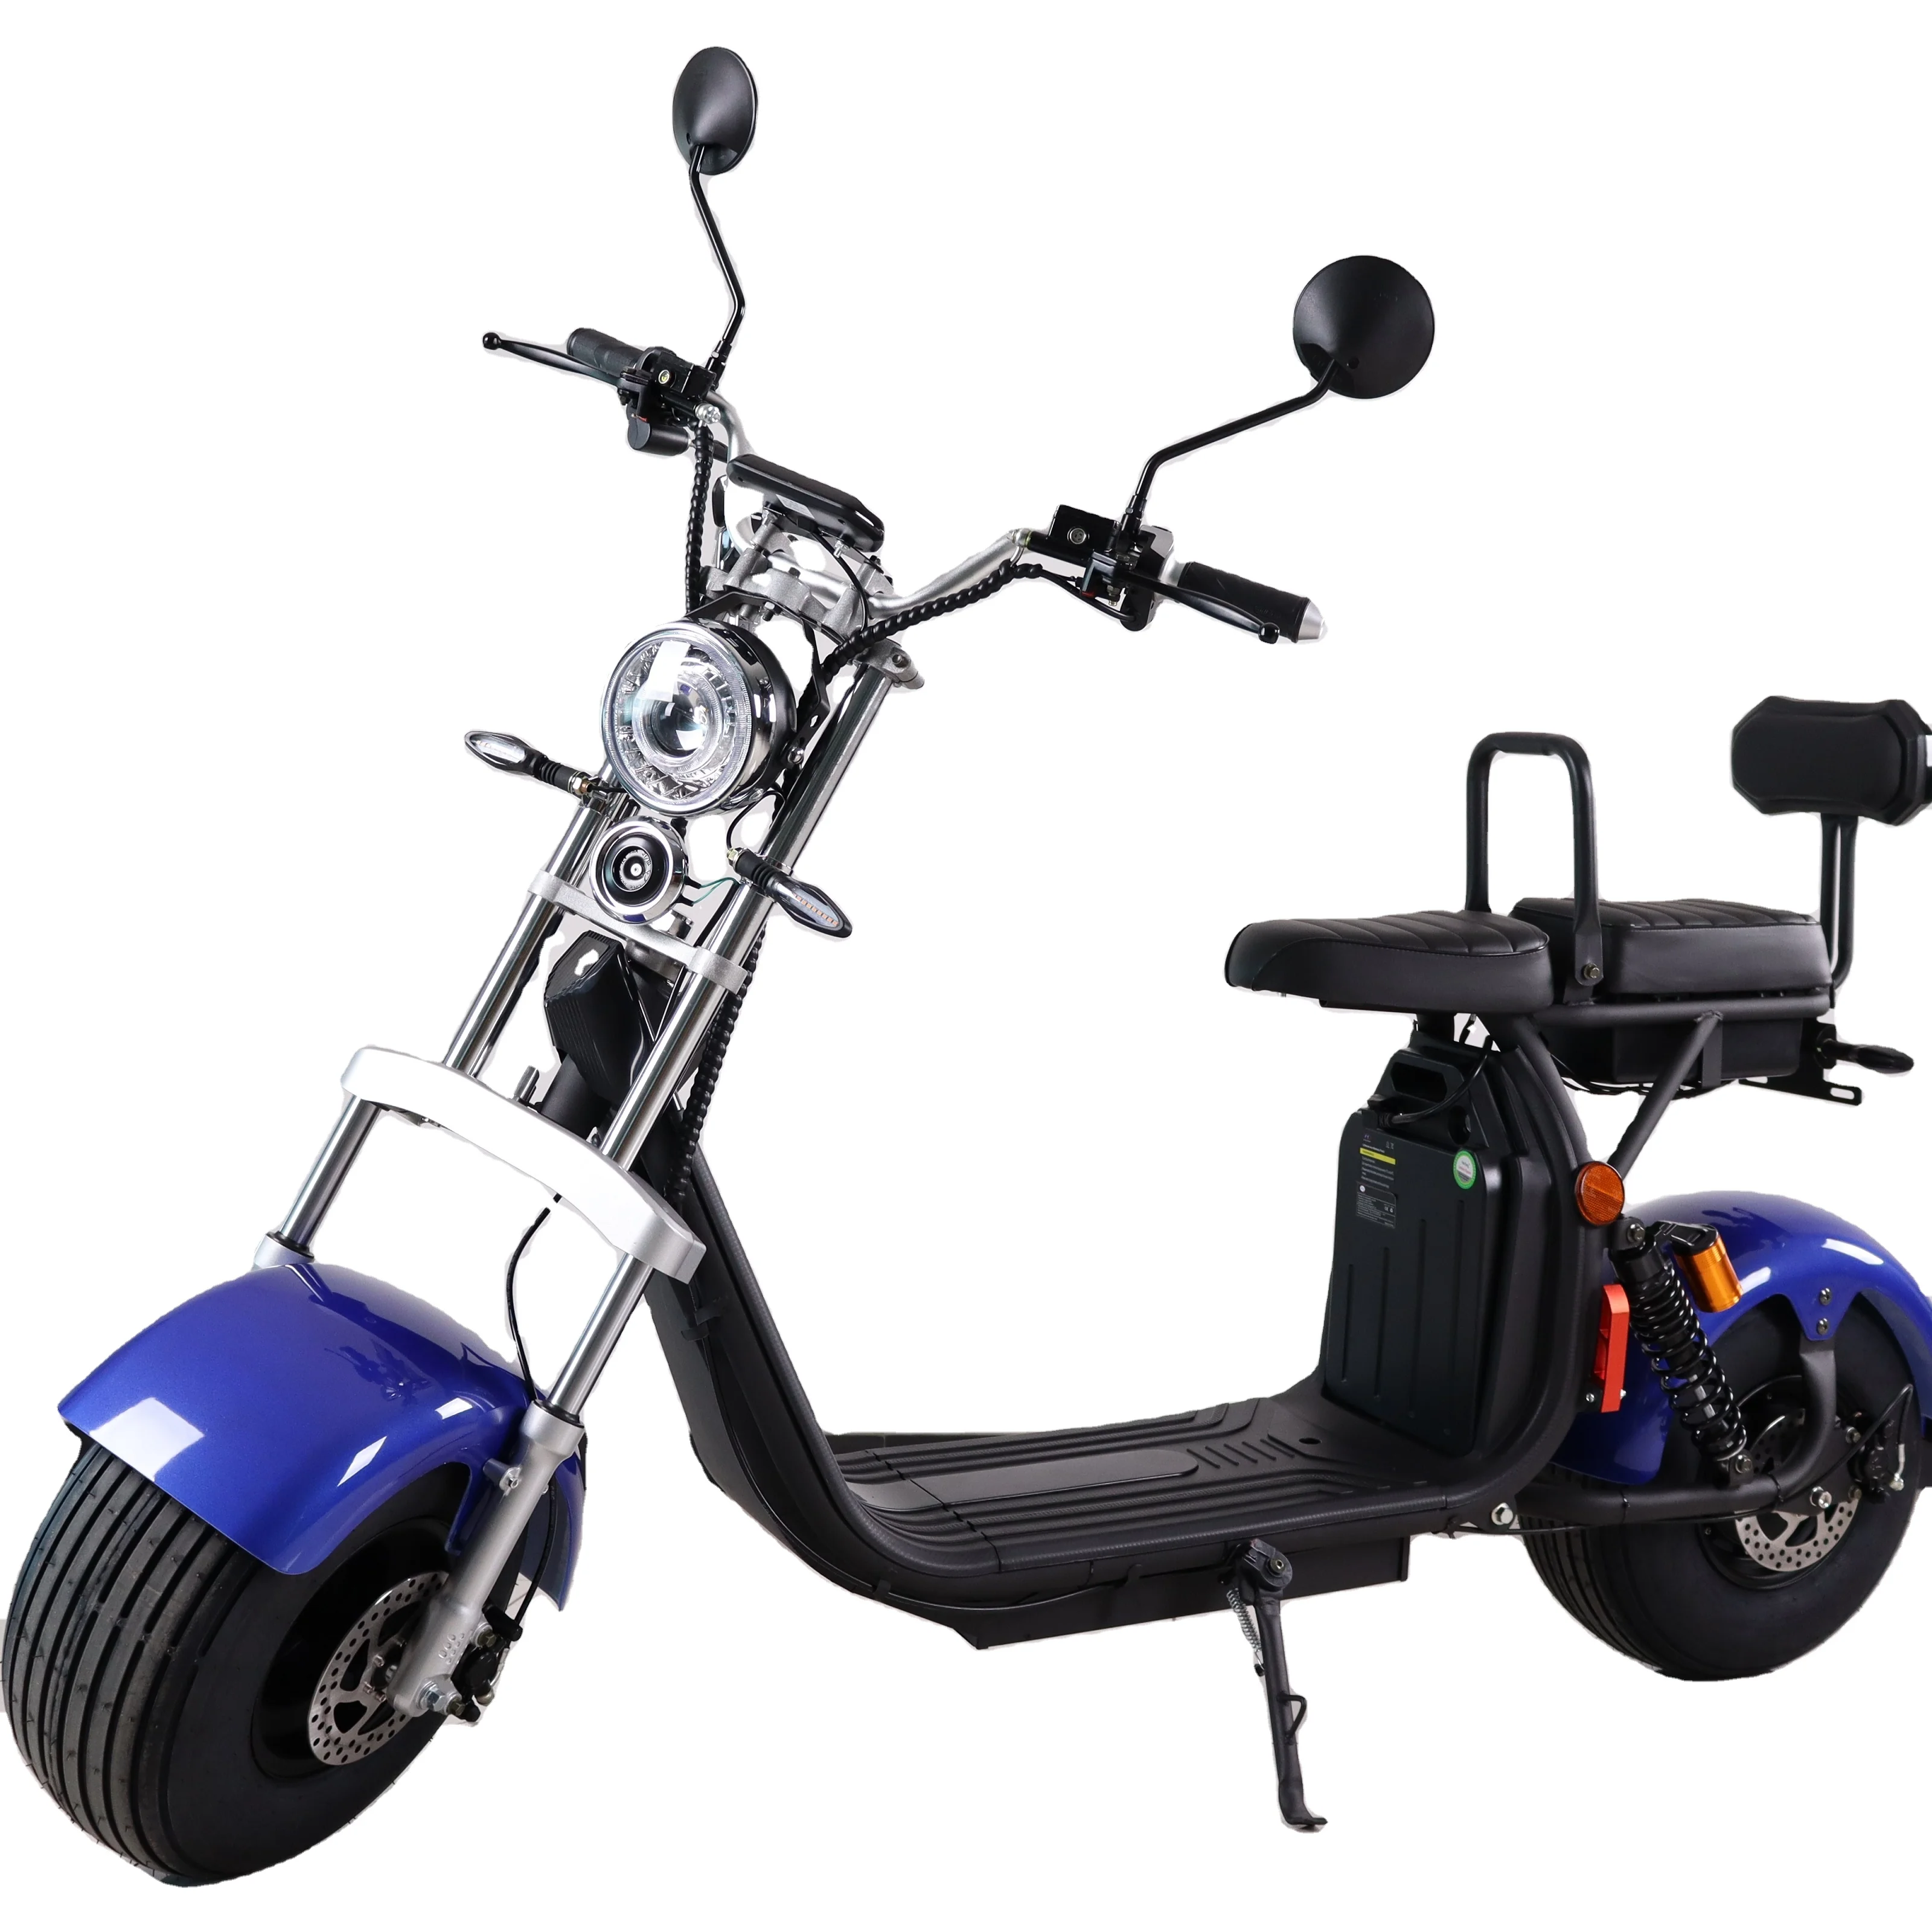 

Best selling Smarda Citycoco 2000w adult electric scooters 2 seats with fat tire cheap scooter, White,black,red,blue,yellow,brown(accept color custom-made)